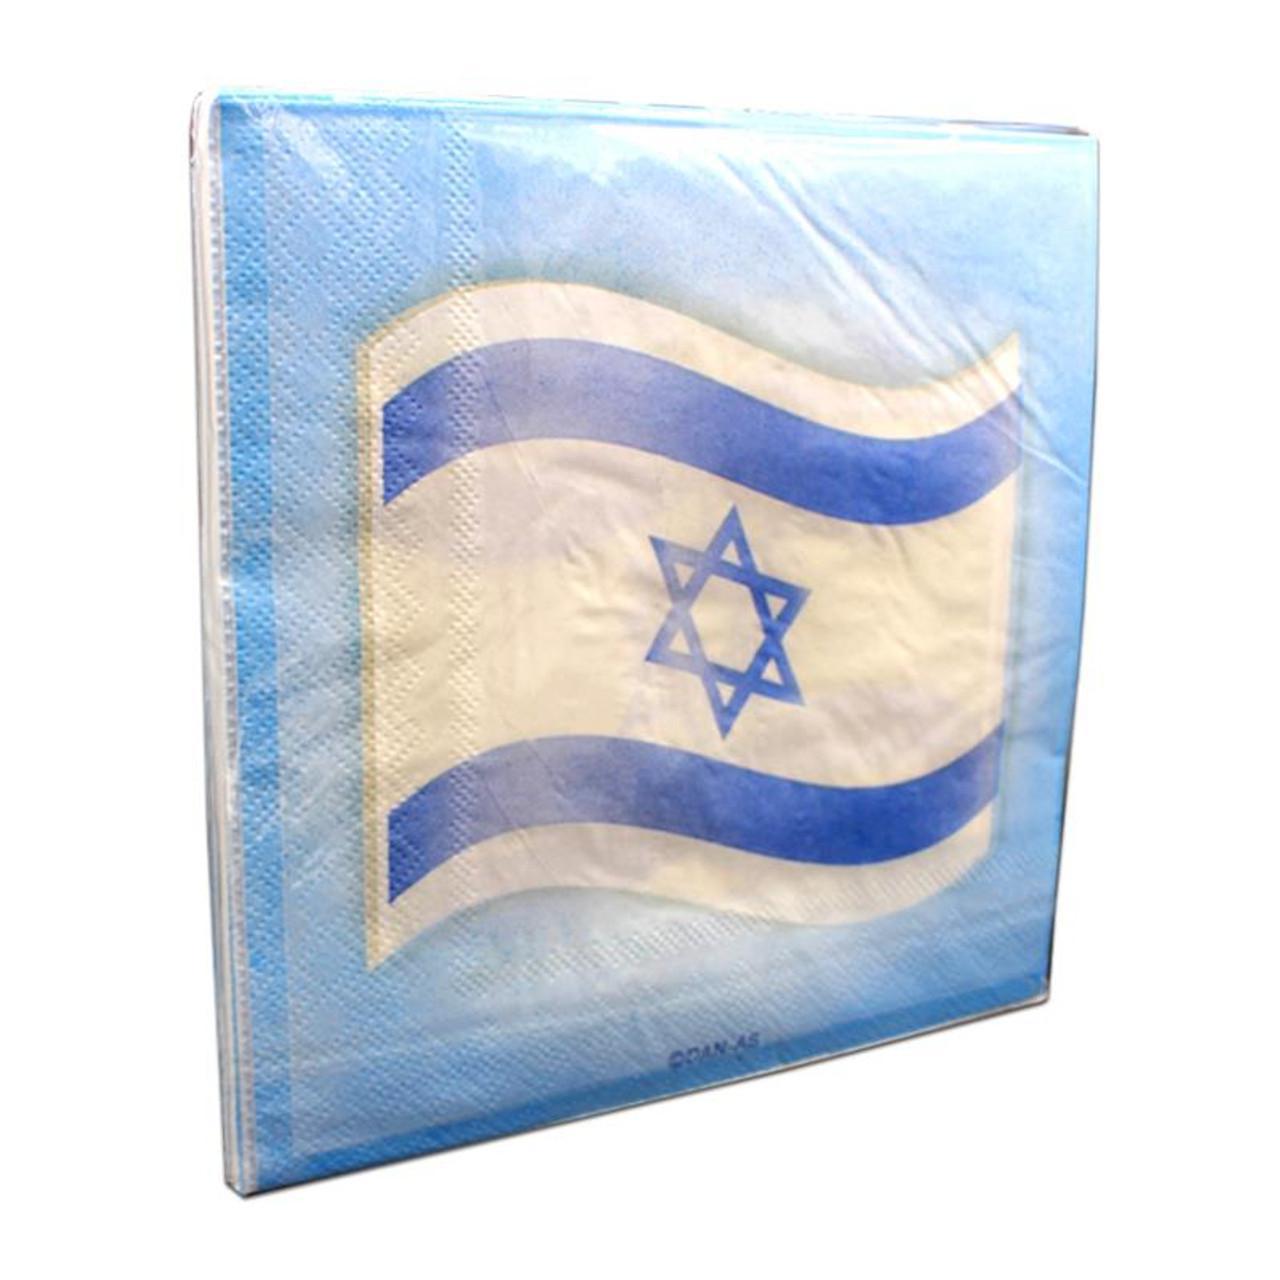 Napkin With Israeli Flag (20 Count) - Set With Style